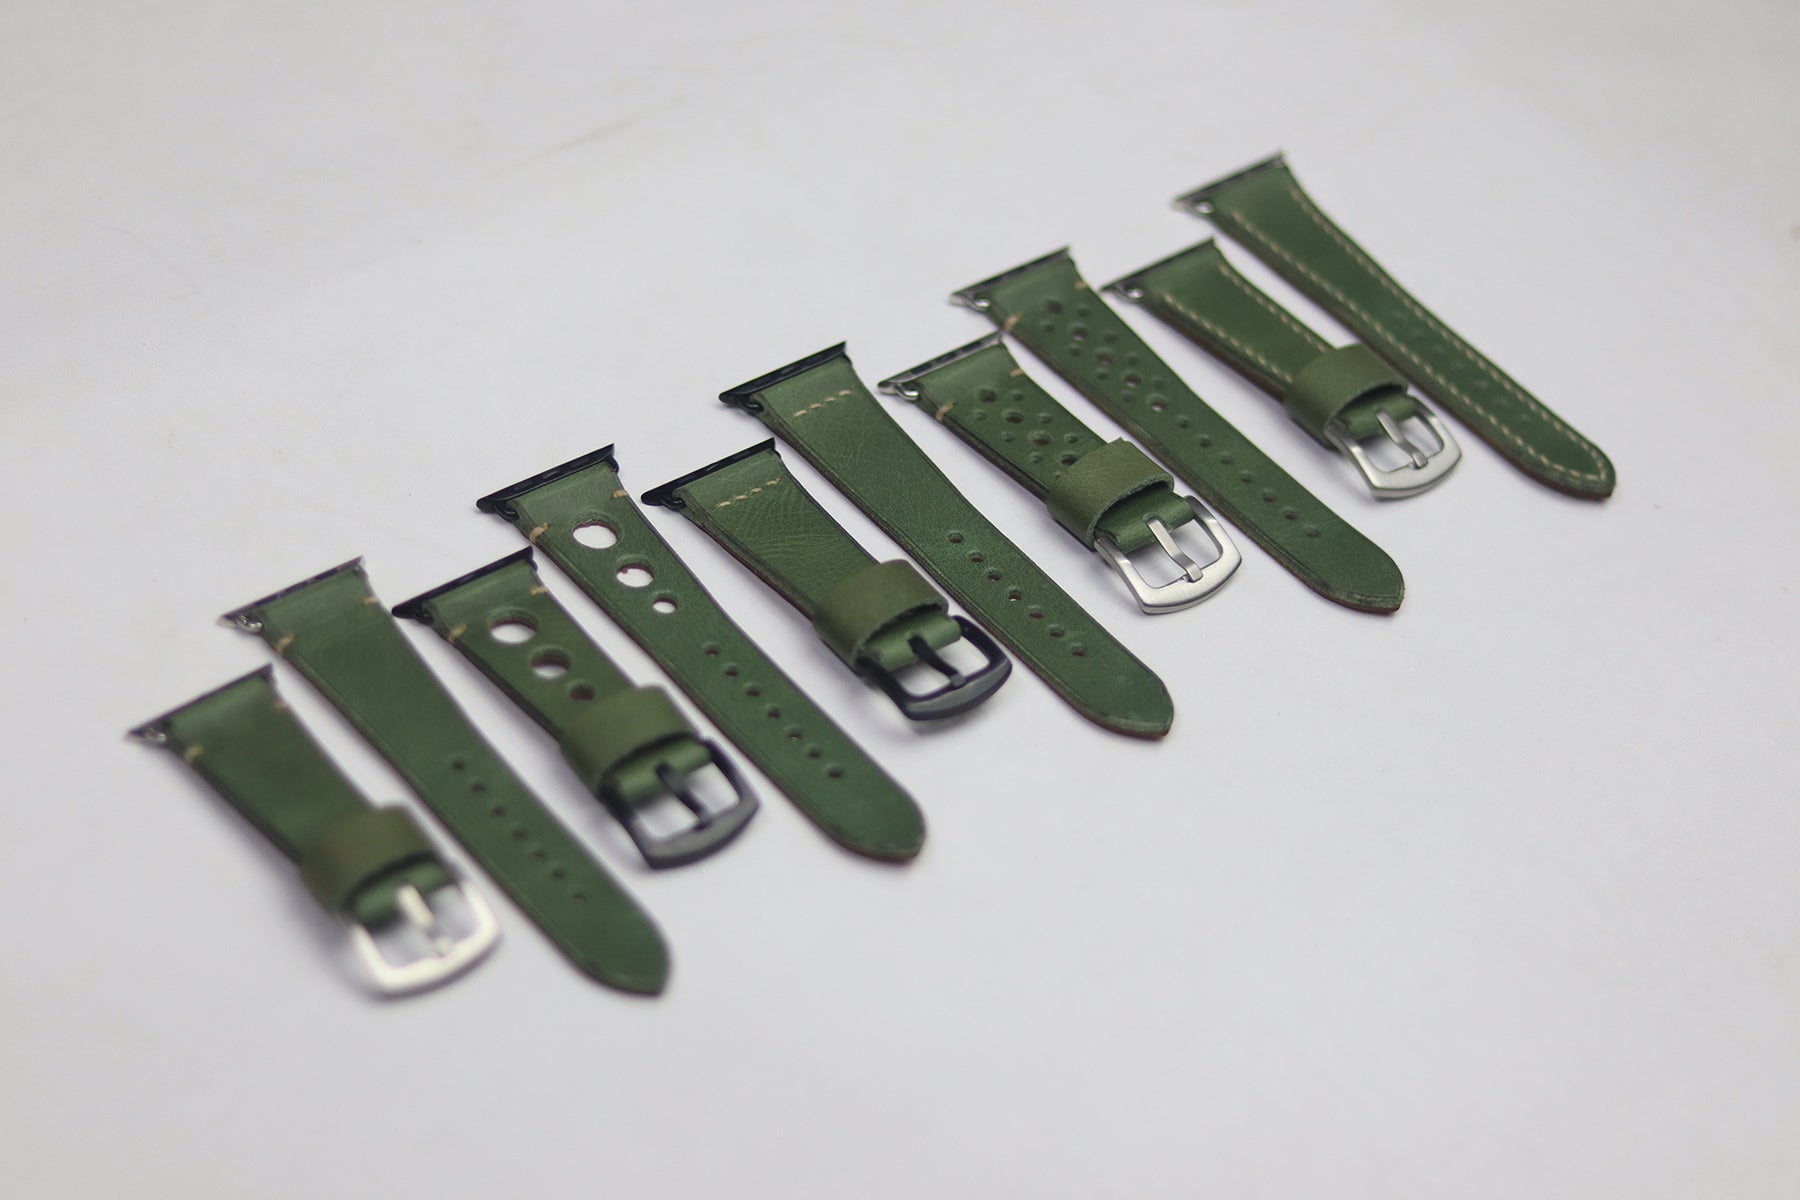 PARAKEET GREEN HAND-CRAFTED APPLE WATCH STRAPS